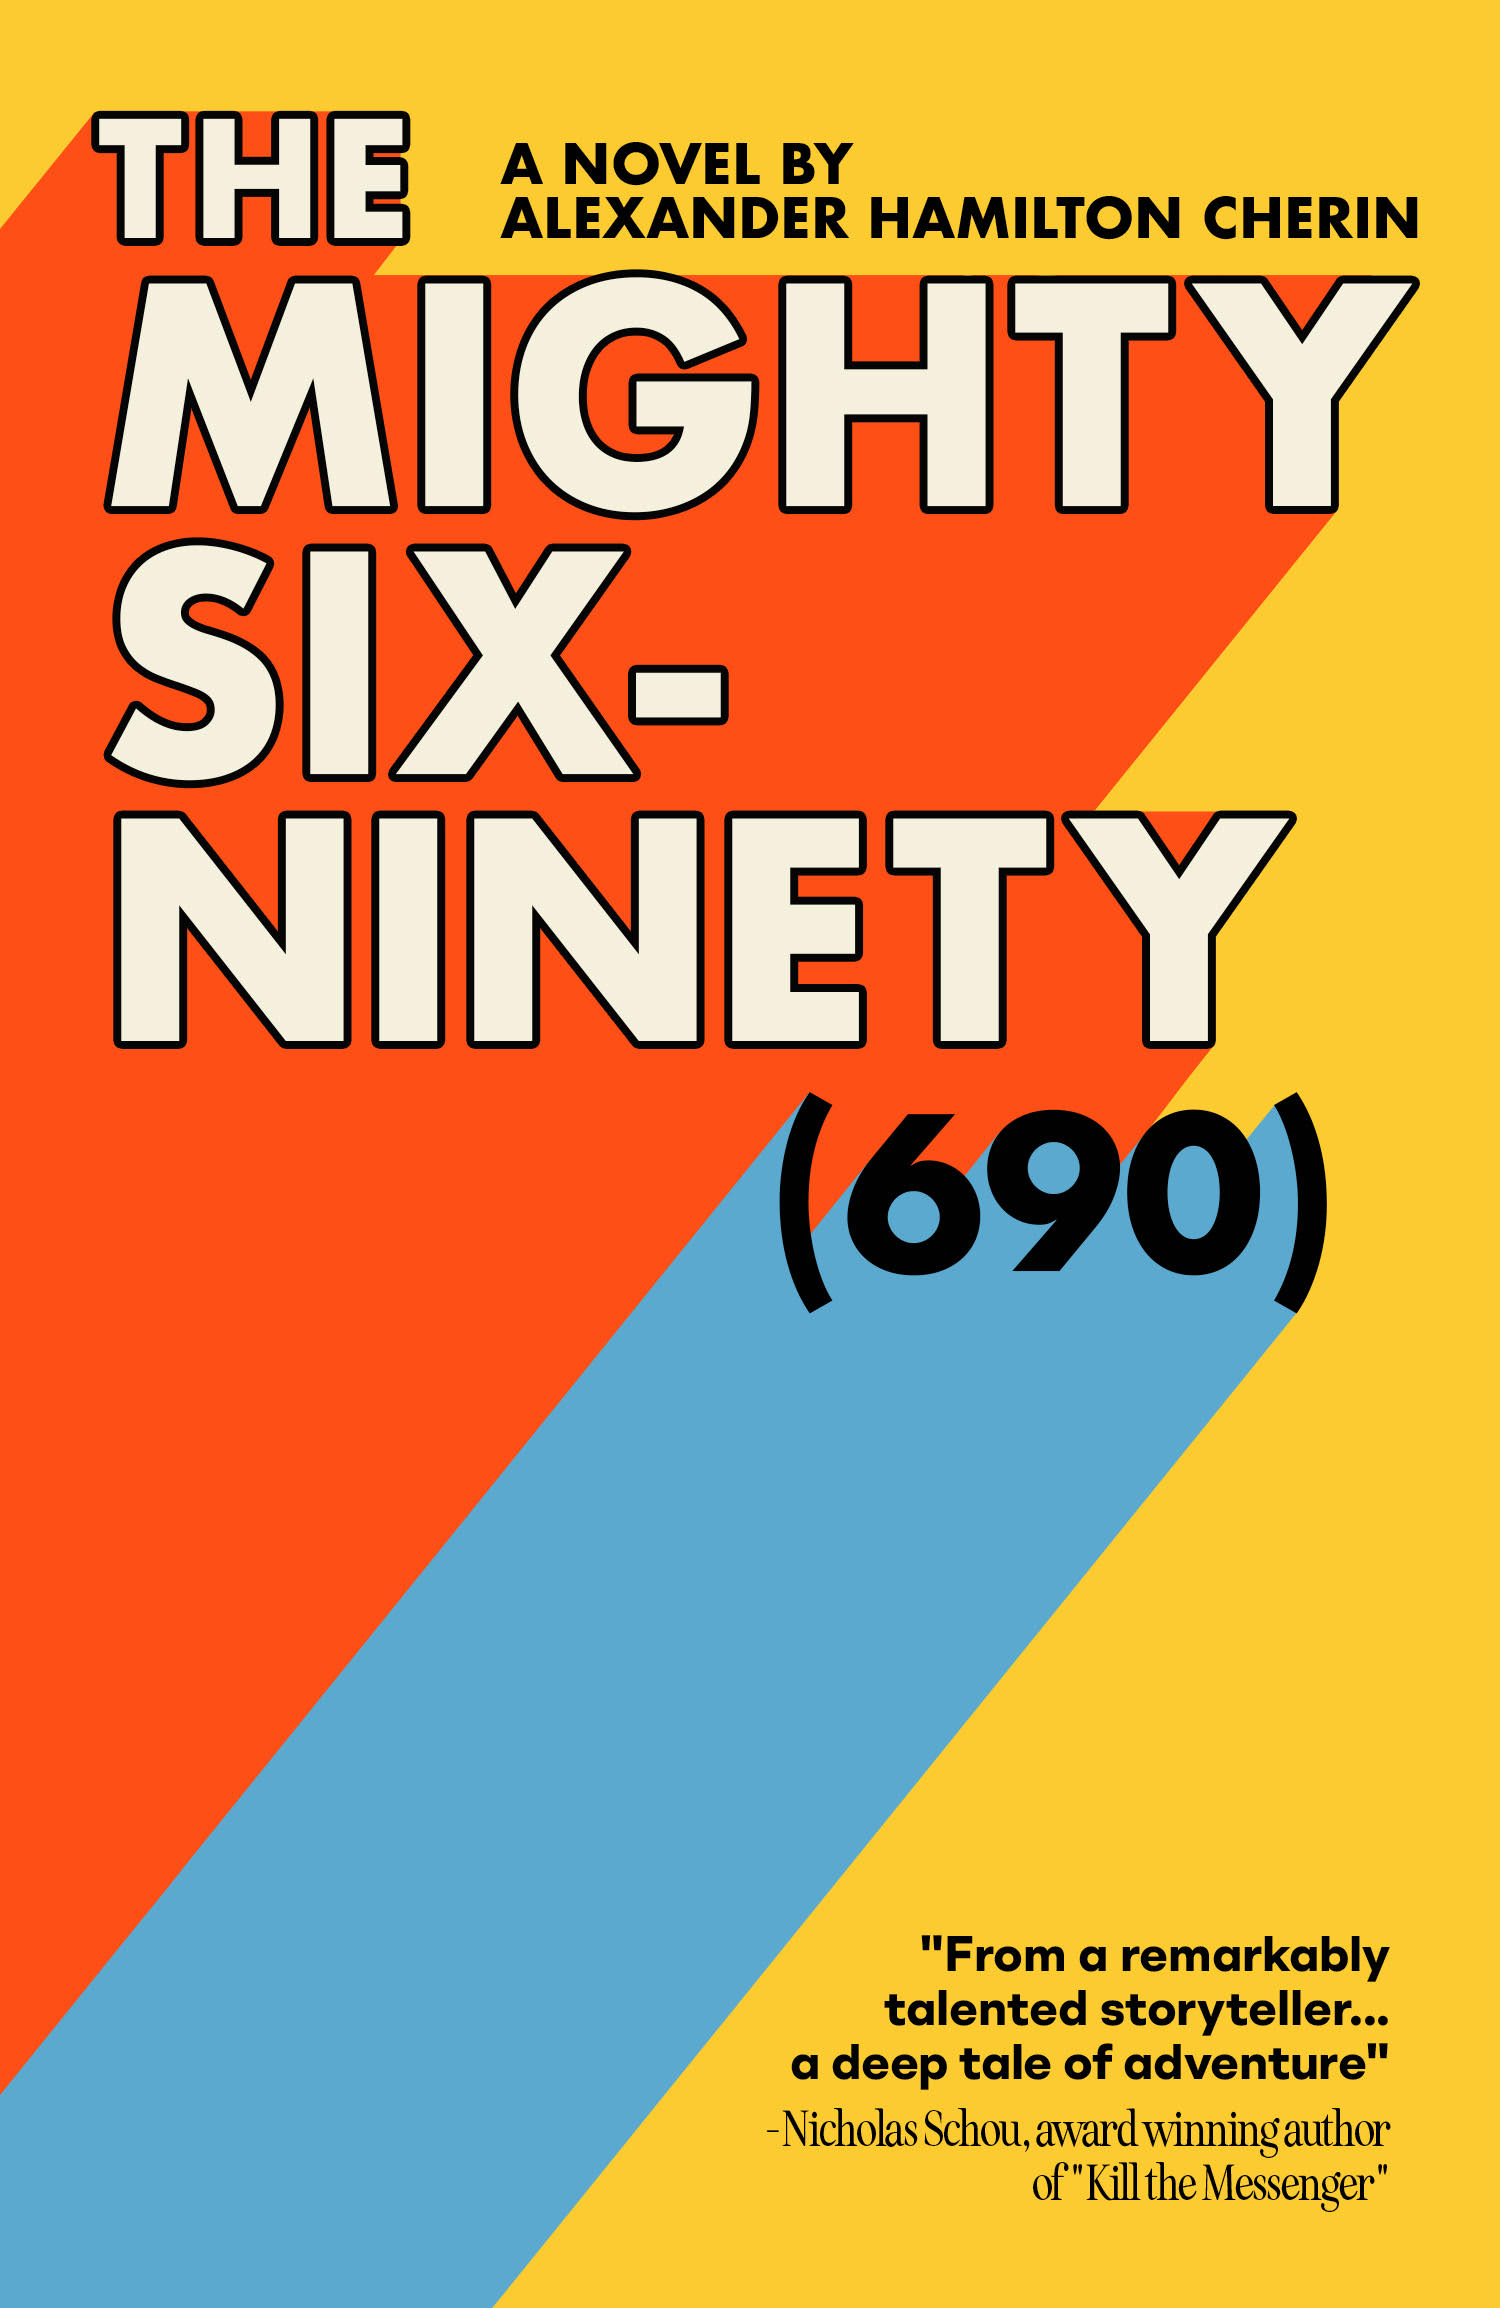 The Mighty Six-Ninety (690) by Alex Cherin book cover